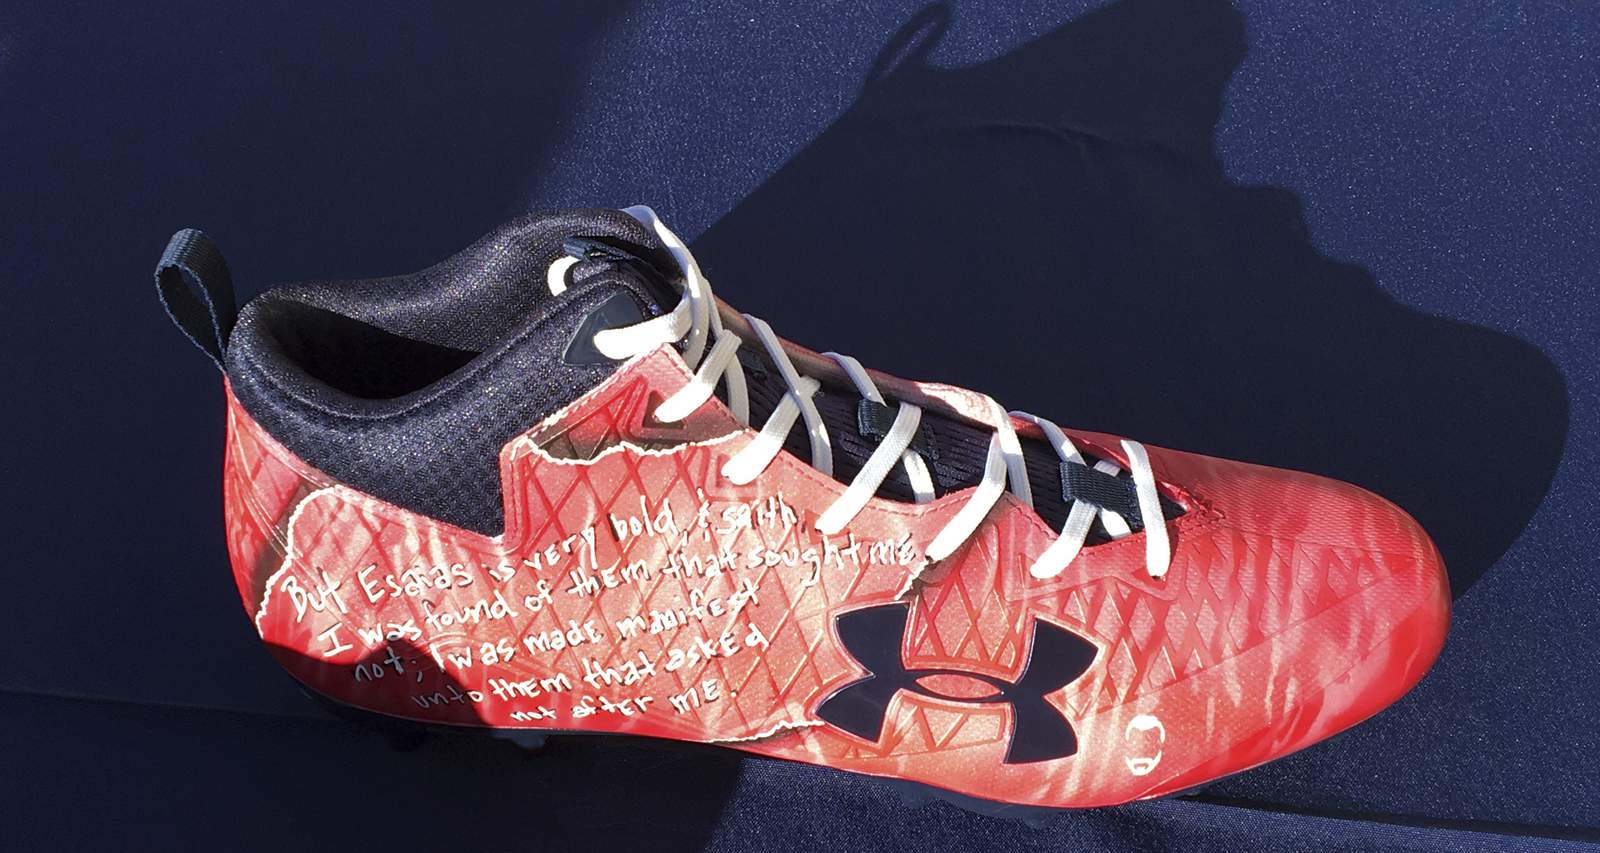 NFL players unveil their causes for the league’s ‘My Cause My Cleats’ 2020 games